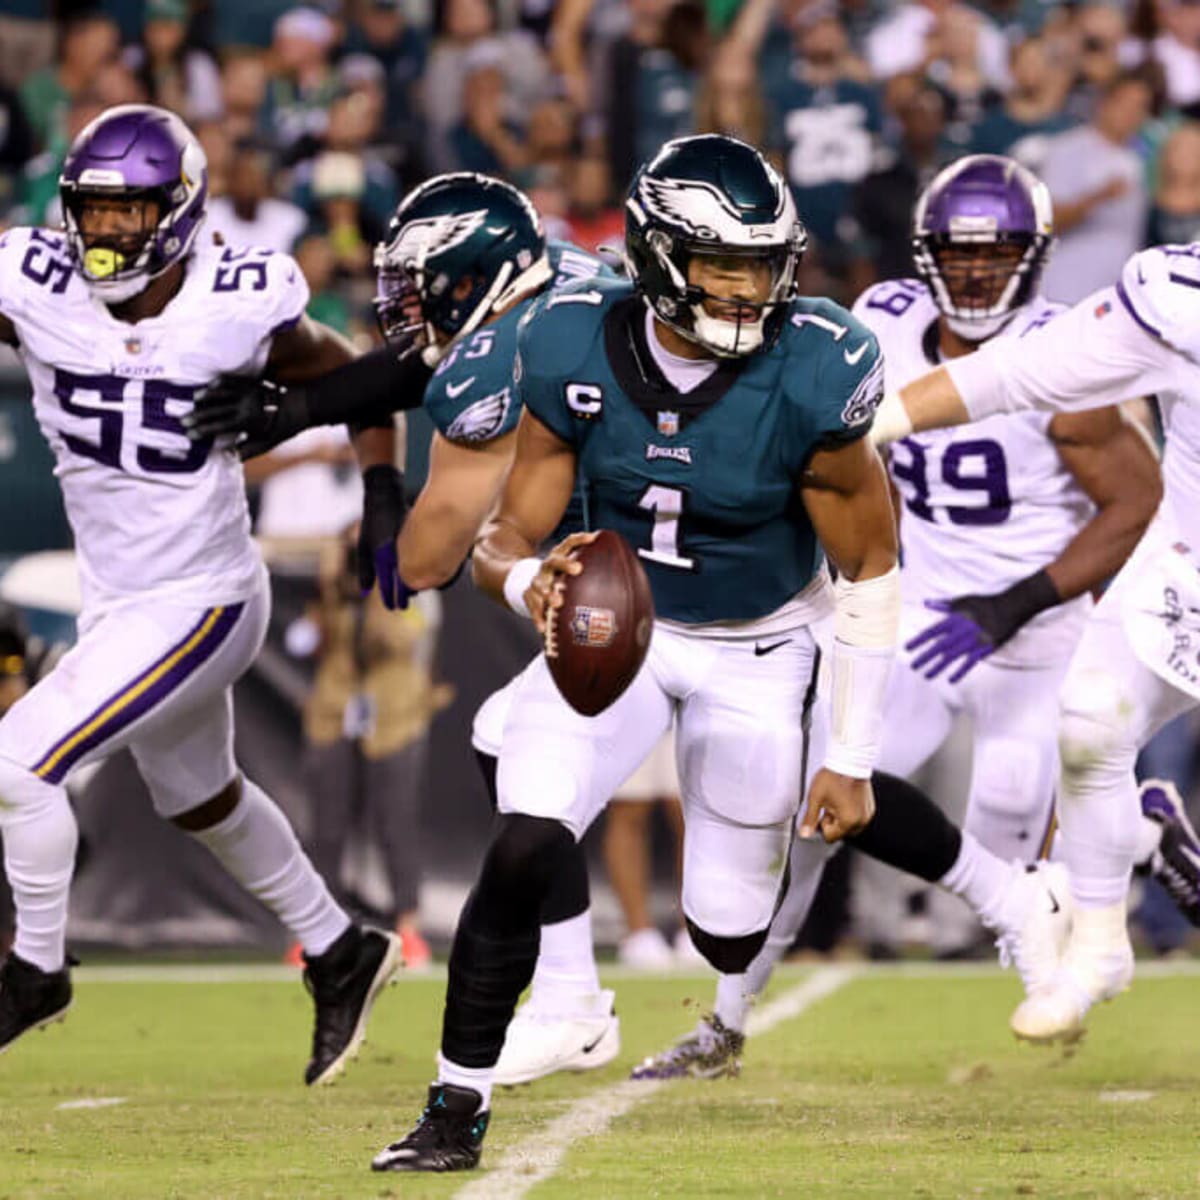 Eagles-Vikings: How to watch 'Thursday Night Football' on